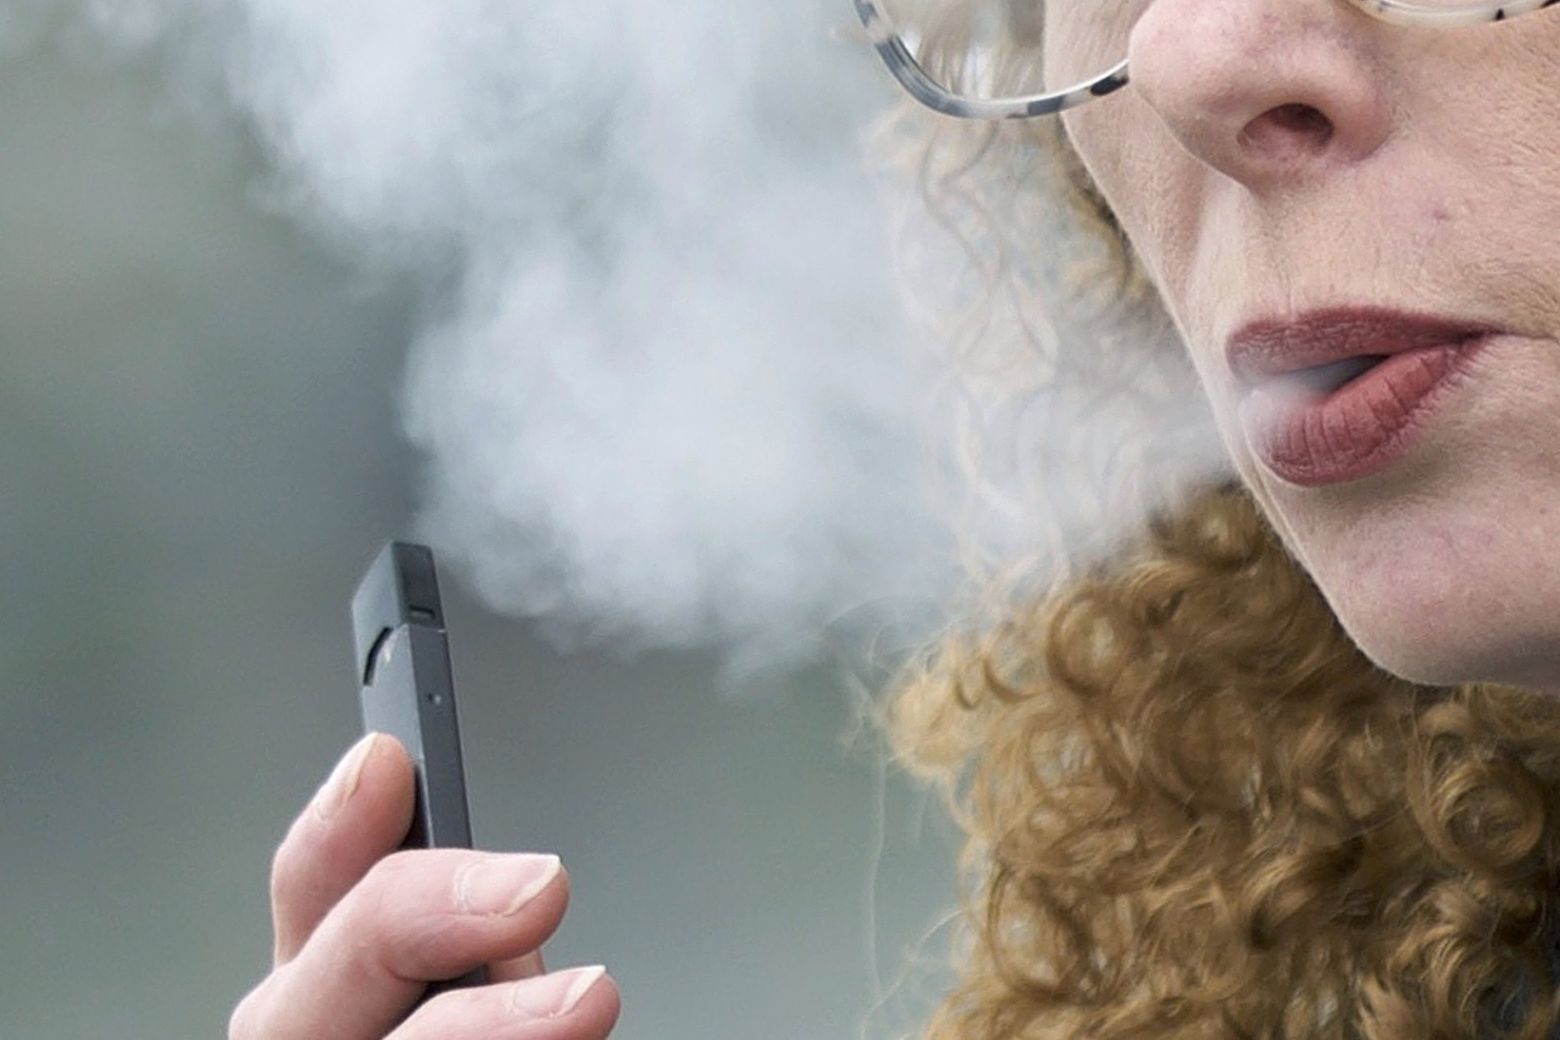 smør Styring FALSK Smokers who switch to vaping may take up healthier routines, new UW study  shows | The Seattle Times